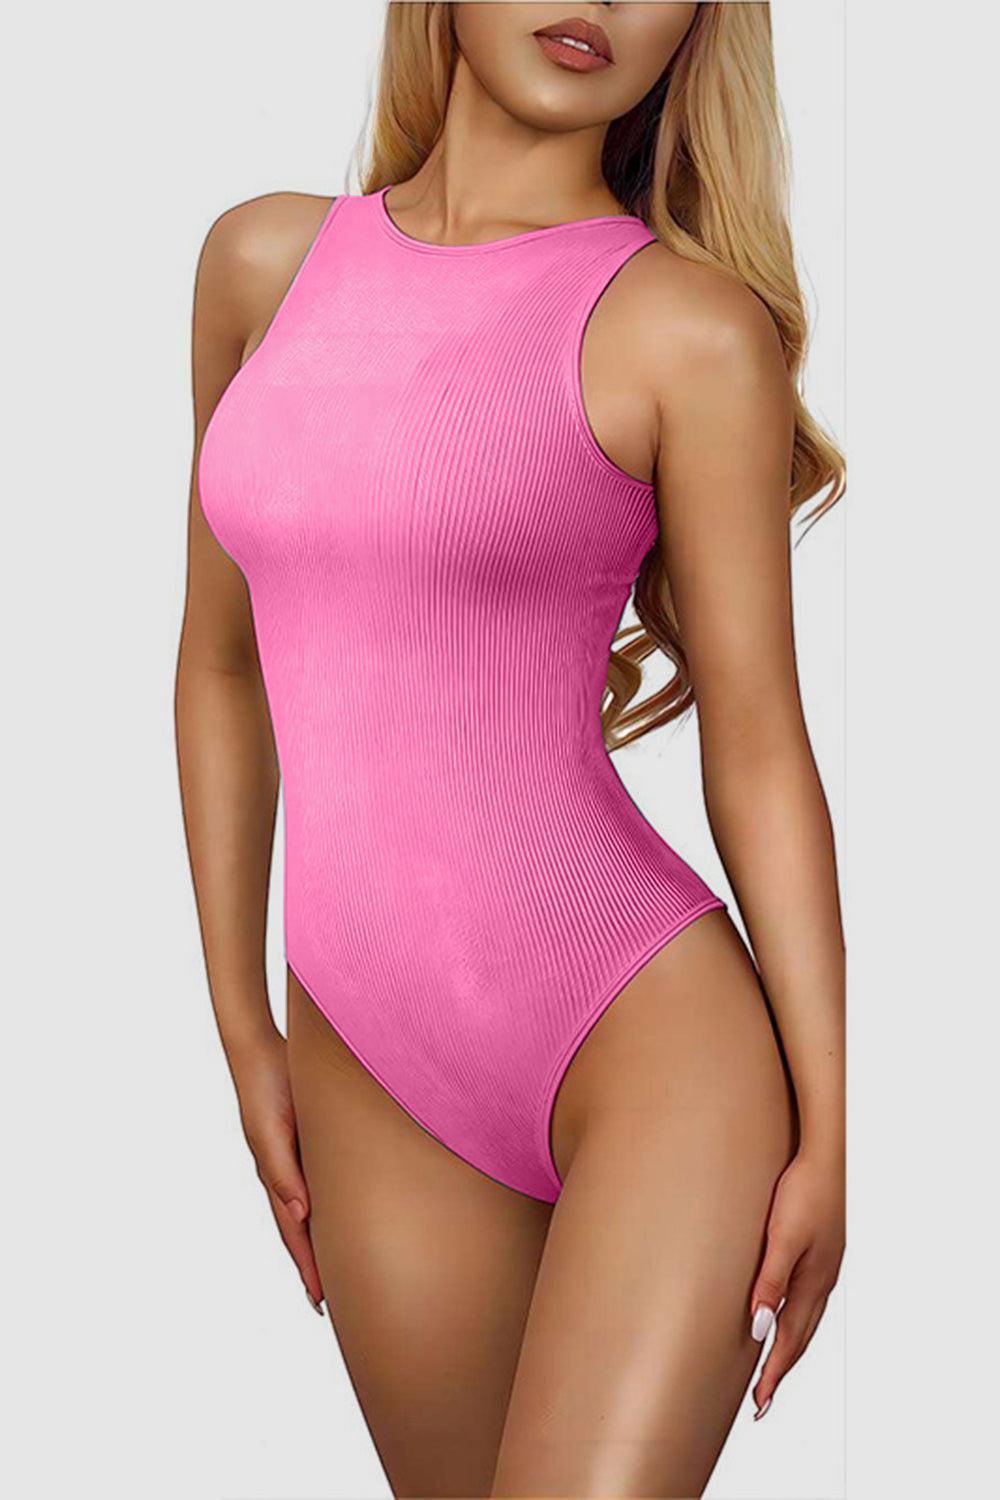 a woman in a pink bodysuit posing for a picture